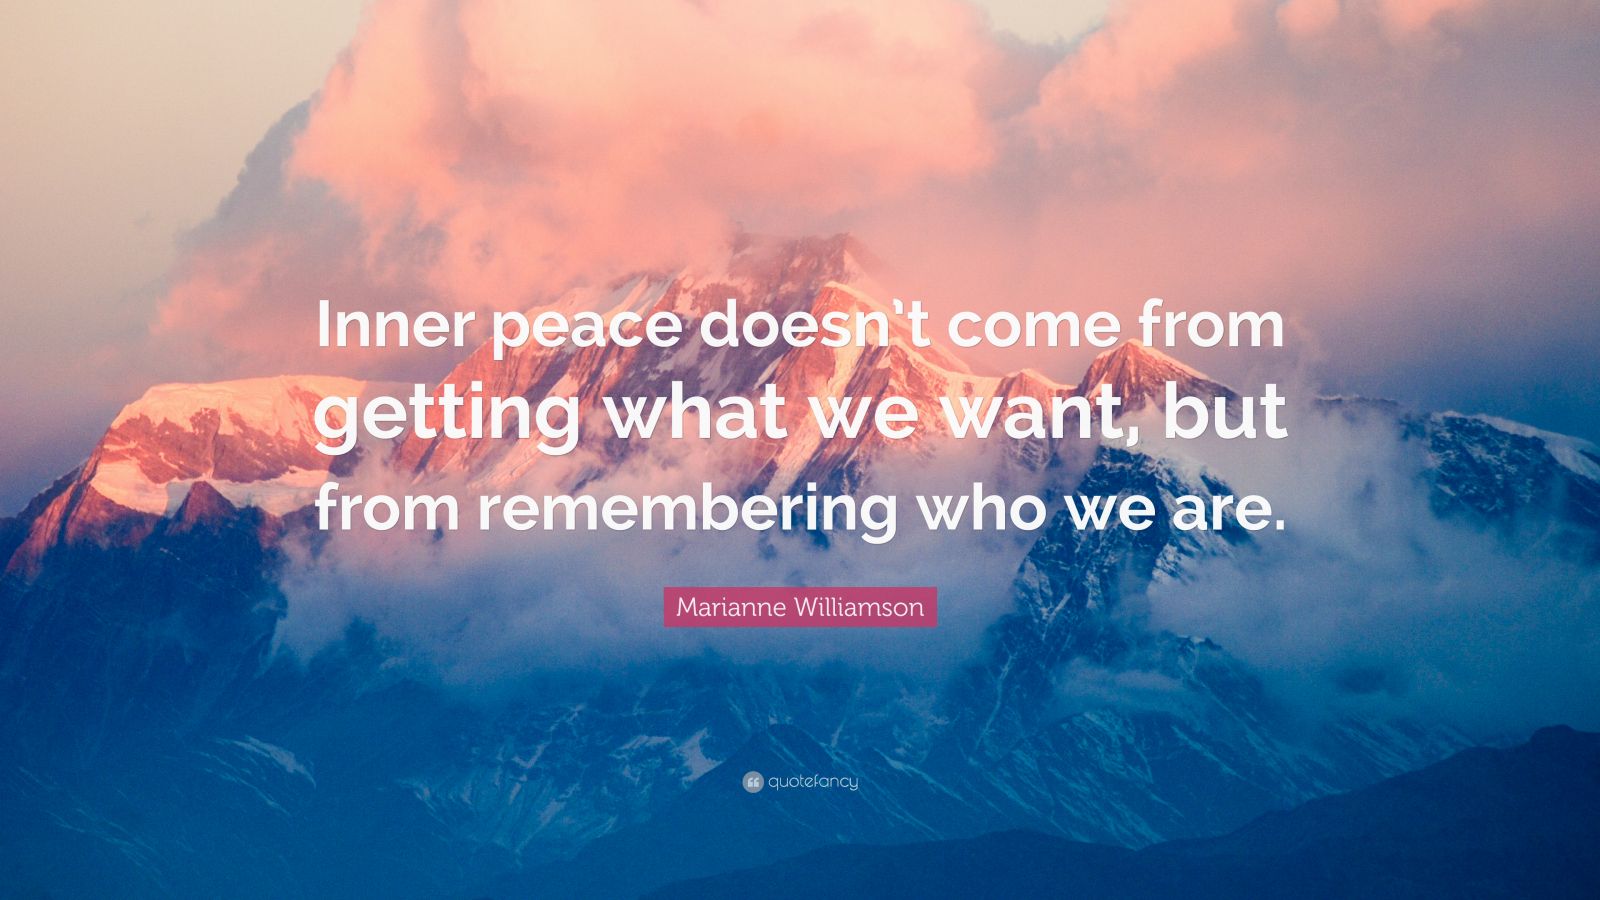 "inner peace doesn"t come from getting what we want, but from